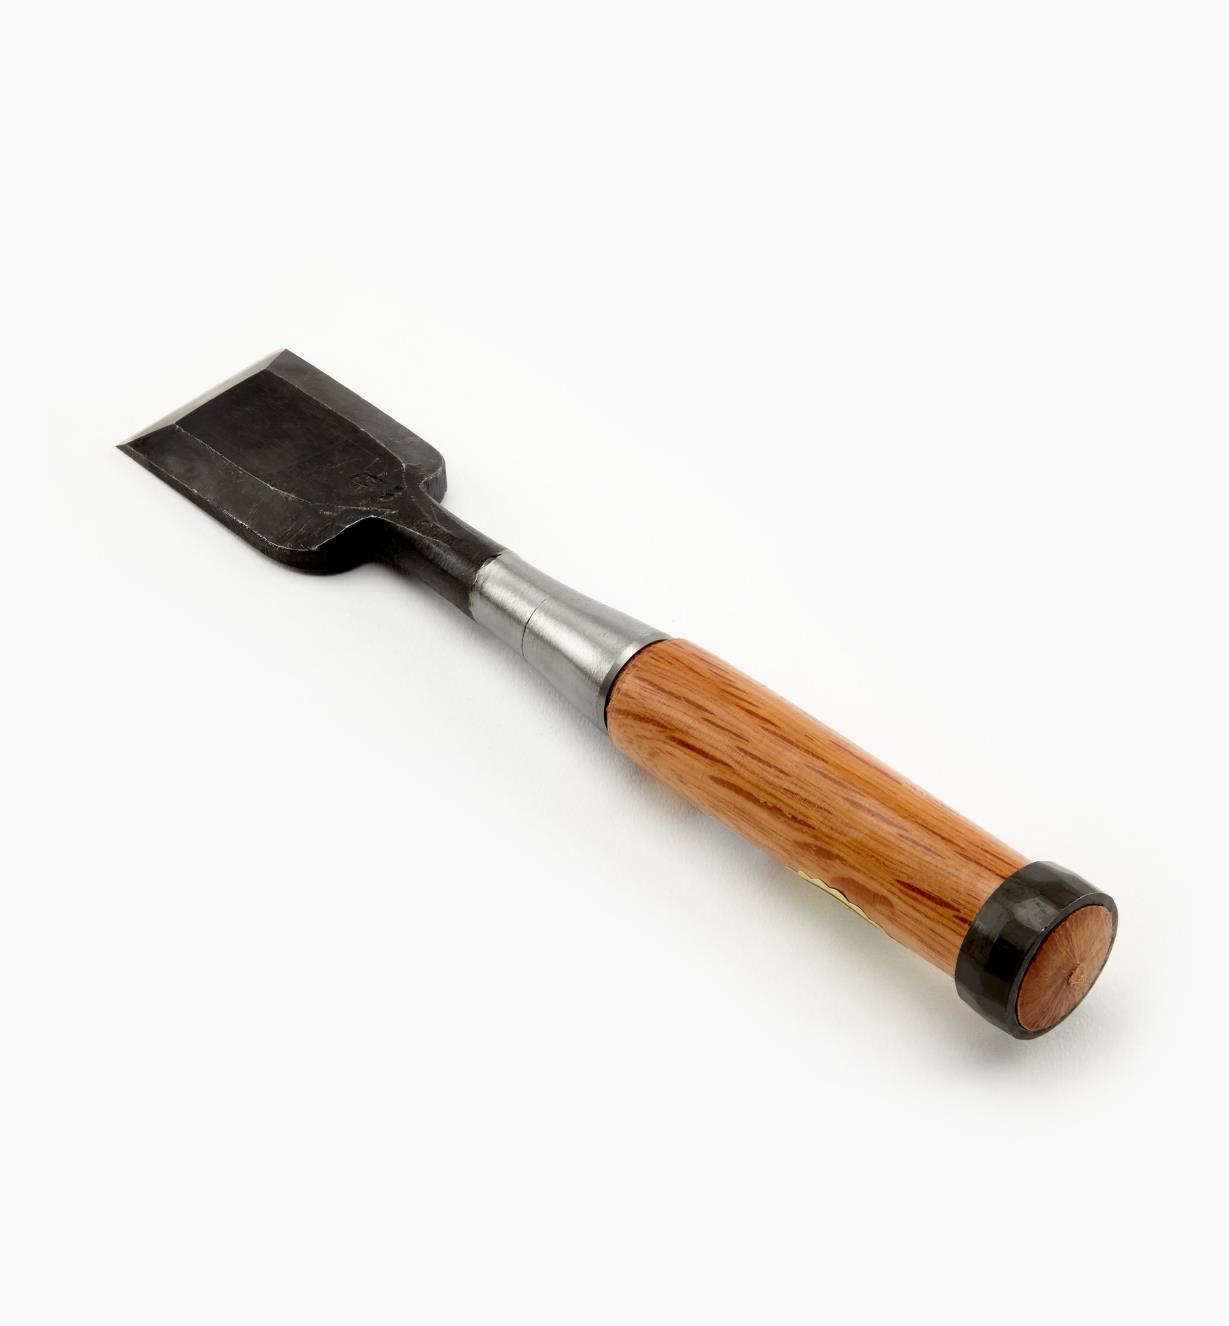 60S0642 - BE Chisel, 42mm (1 5/8")